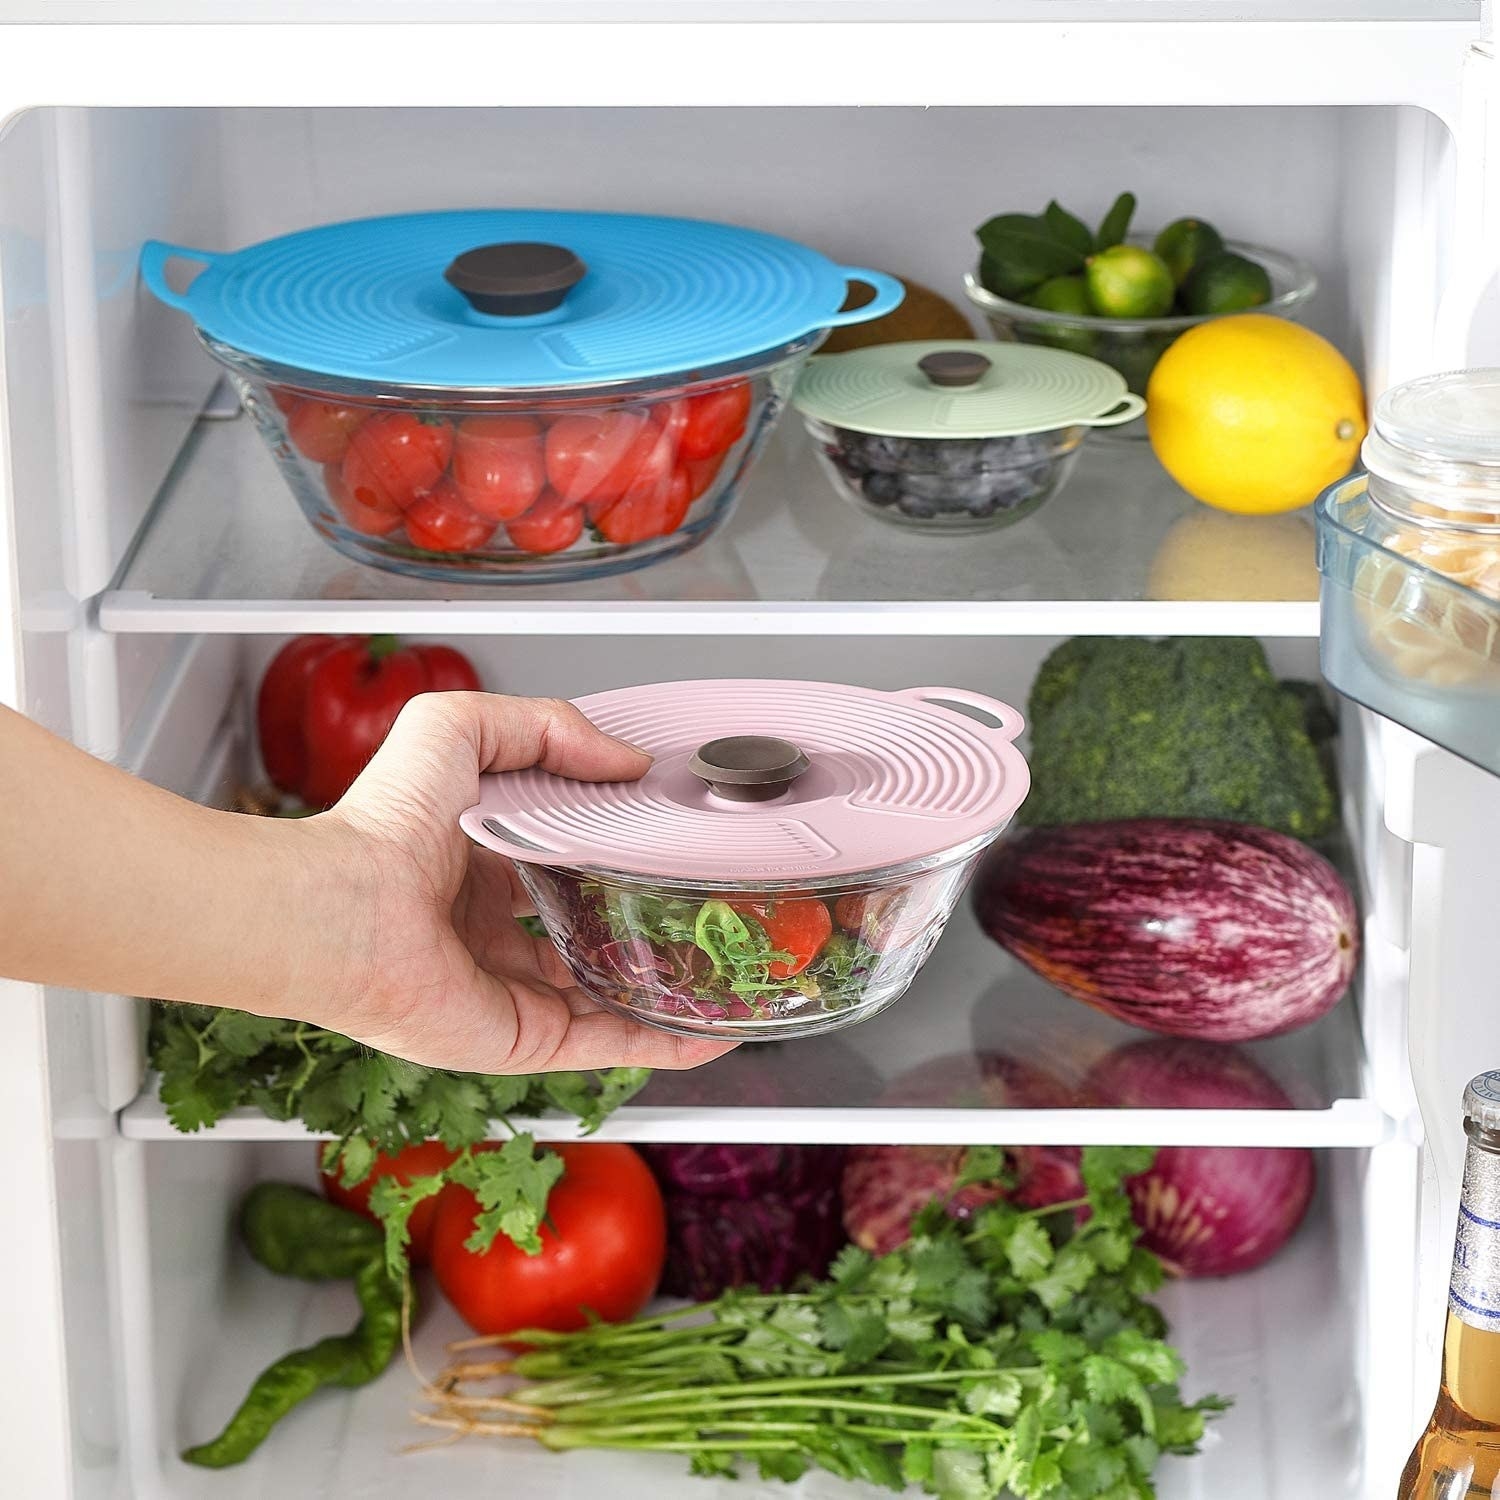 The silicone lids over different dishes in a fridge